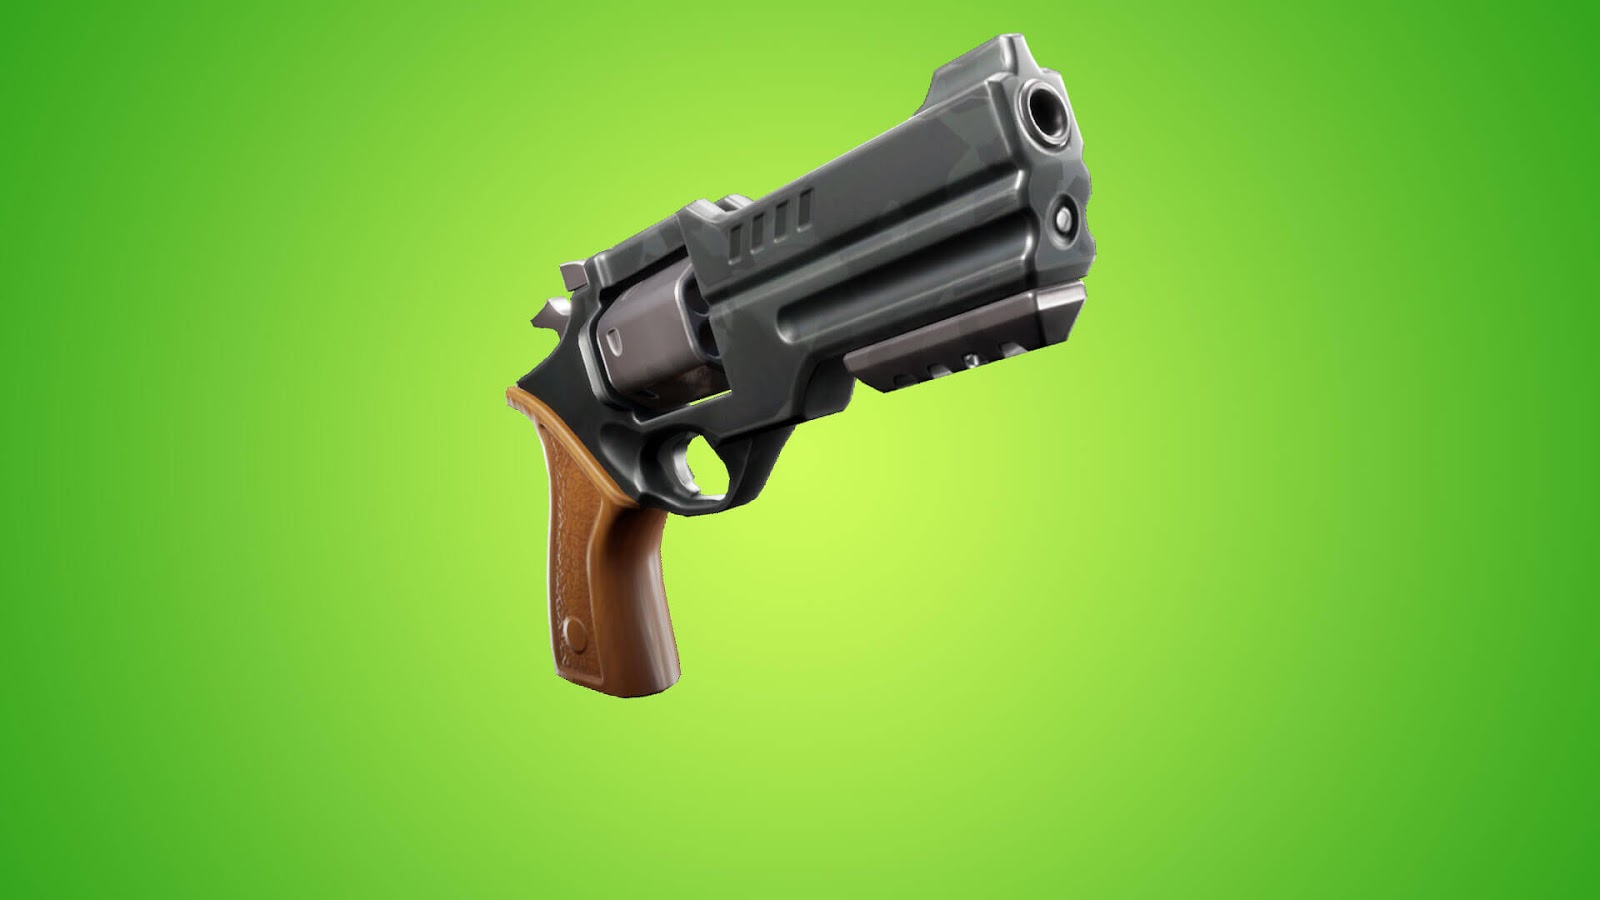 Fortnite V9.30 Content Update #1 Patch Notes Is Now Live